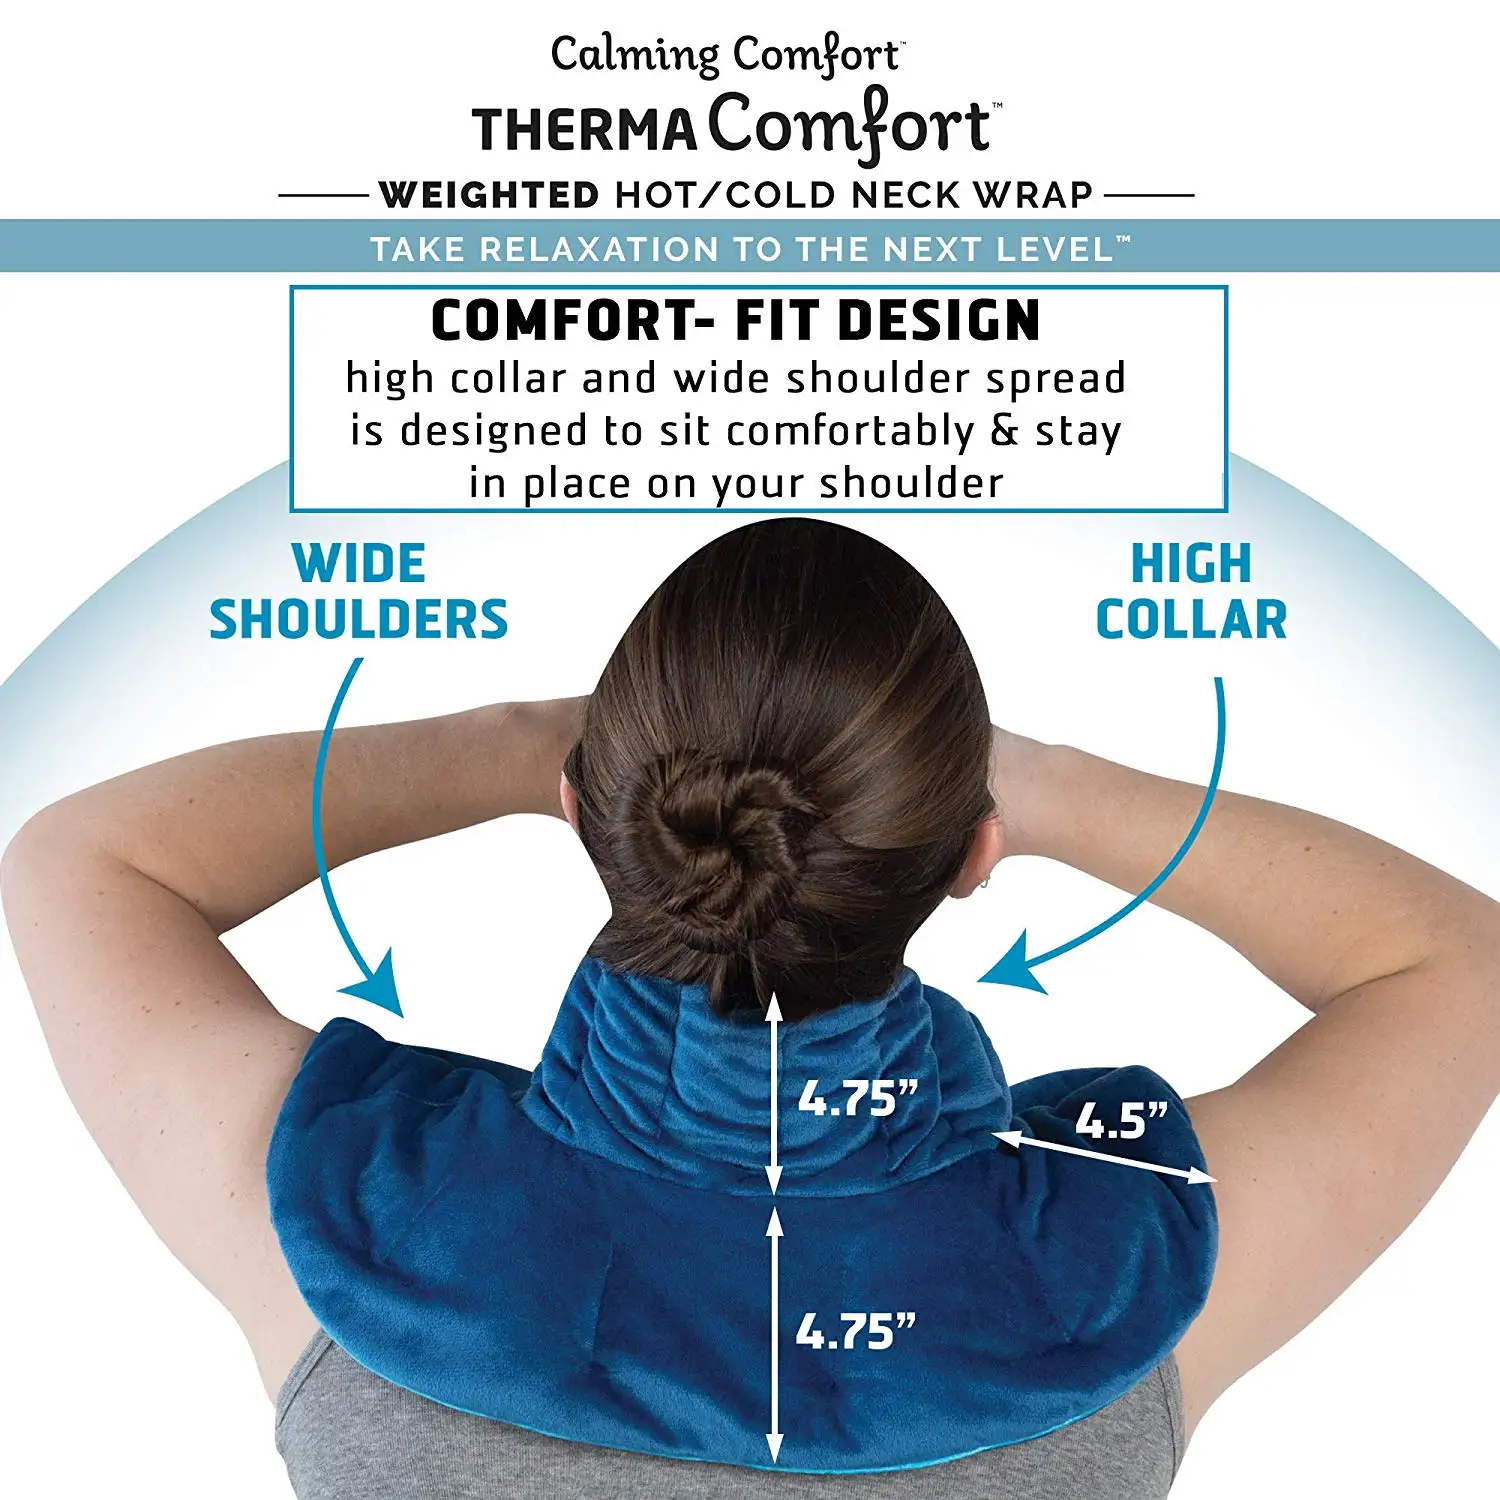 Weighted Therapy Fleece Softer Microwaveable Shoulder and Neck Heating Pad Wrap